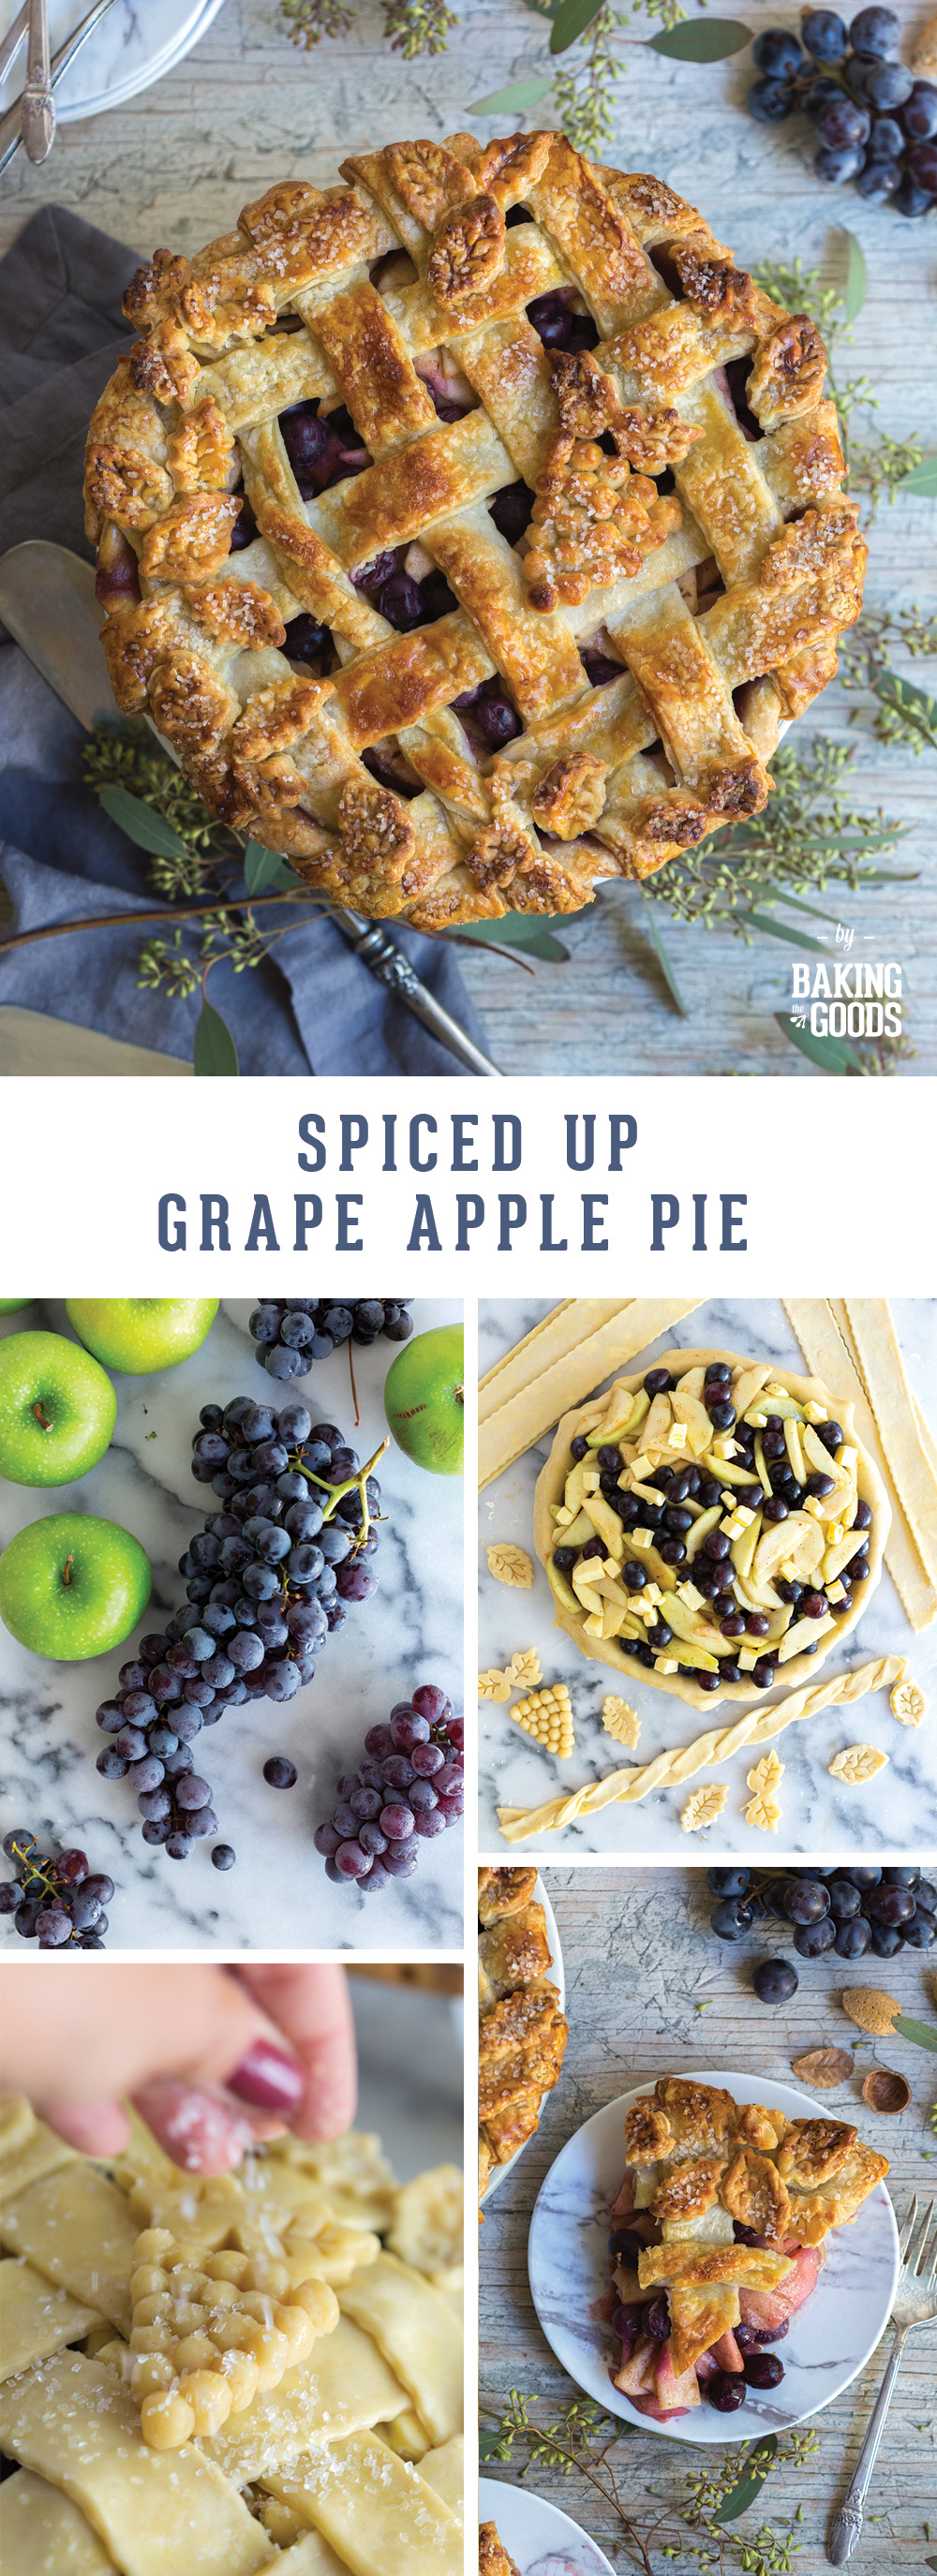 Spiced Up Grape Apple Pie by Baking The Goods